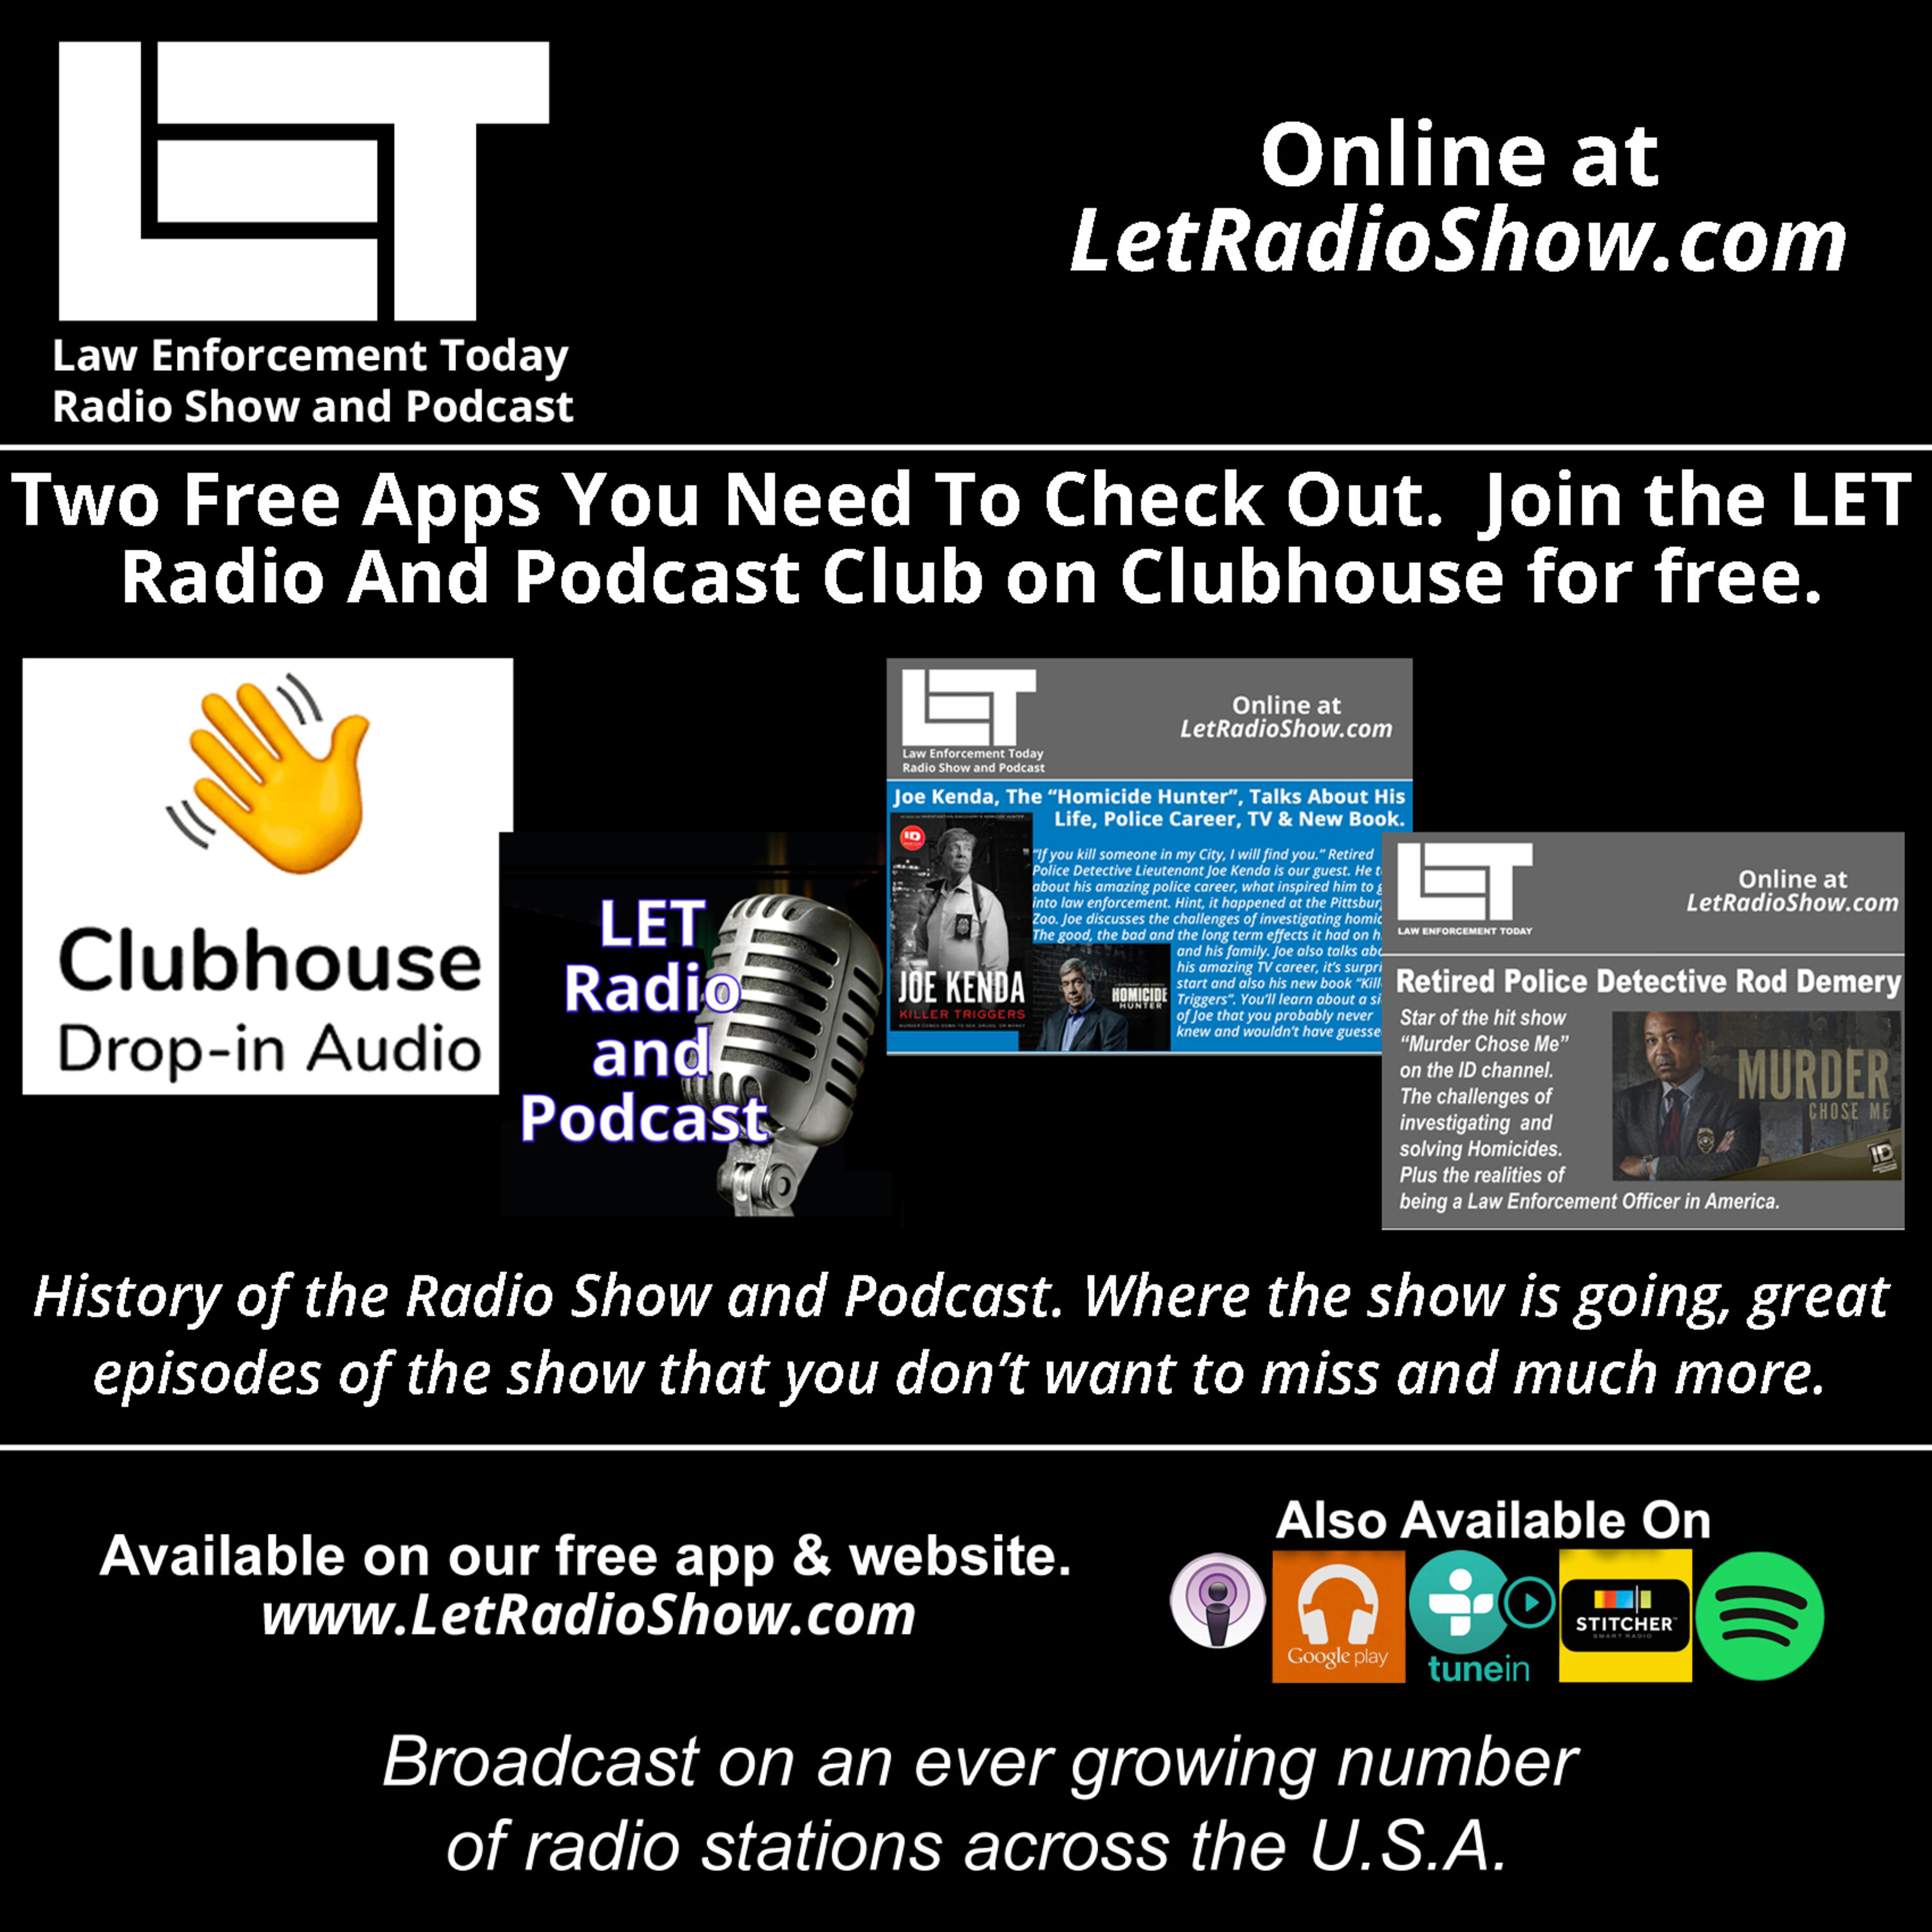 S6E3: Two Free Apps You Need To Check Out. Join The LET Radio And Podcast Club on Clubhouse For Free.